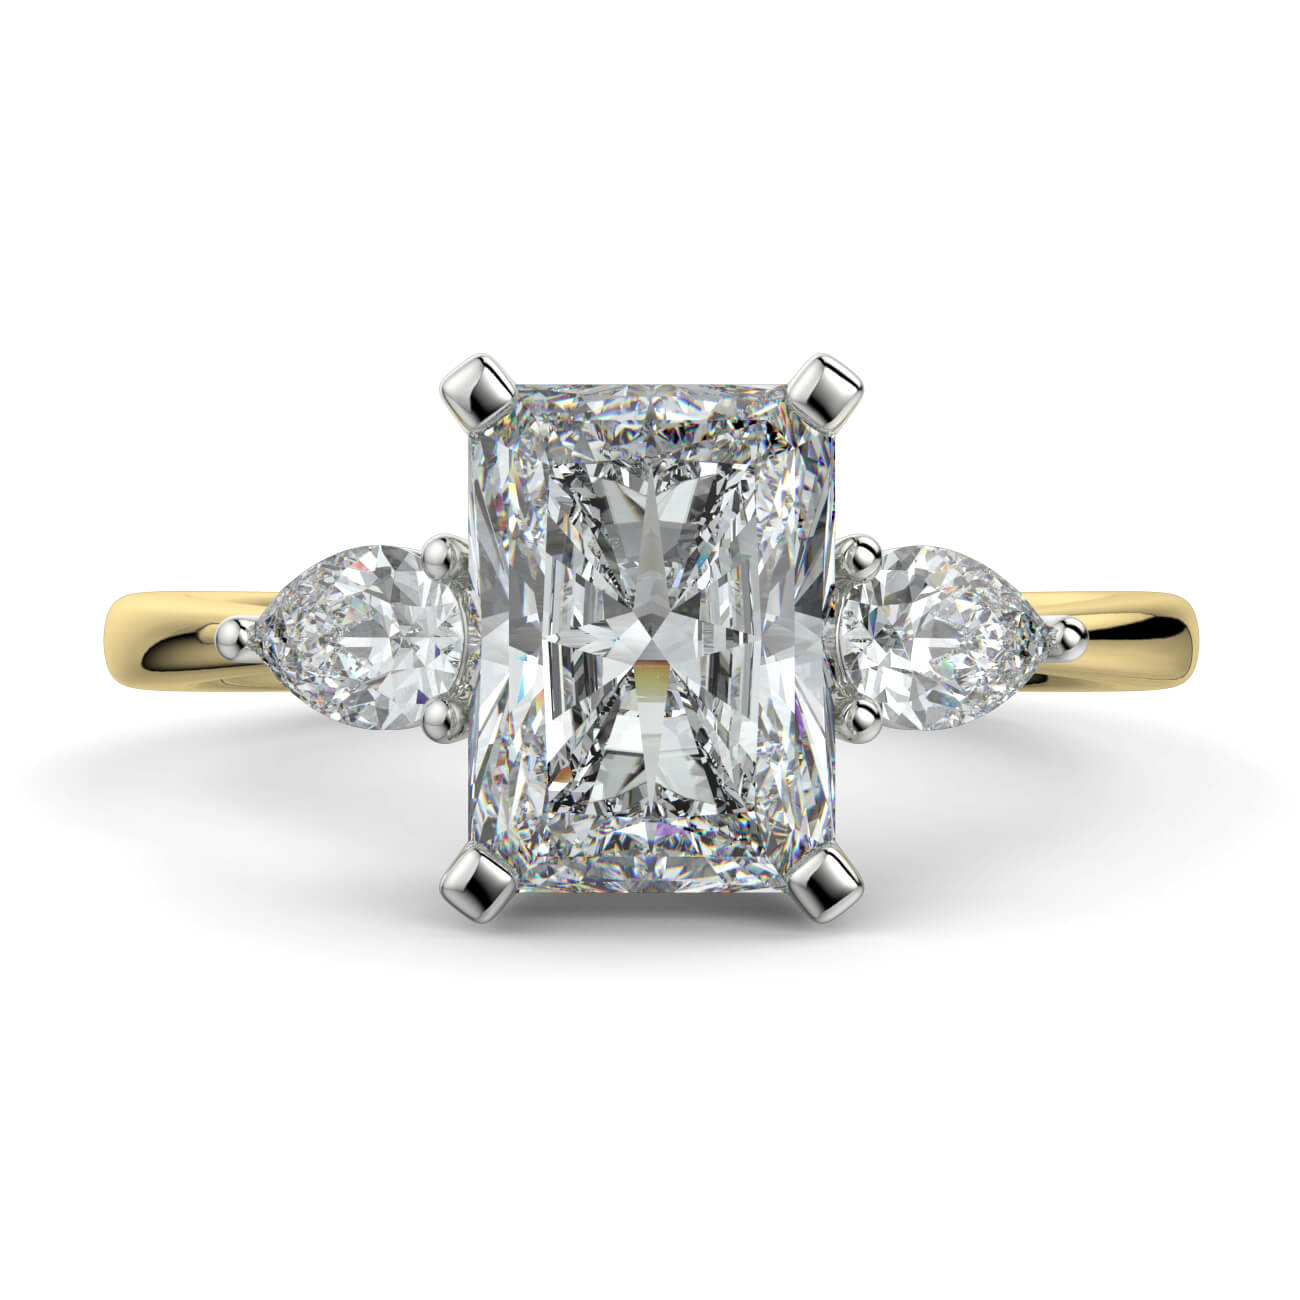 Radiant Cut Diamond Ring With Pear Shape Side Diamonds In Yellow and White Gold – Australian Diamond Network